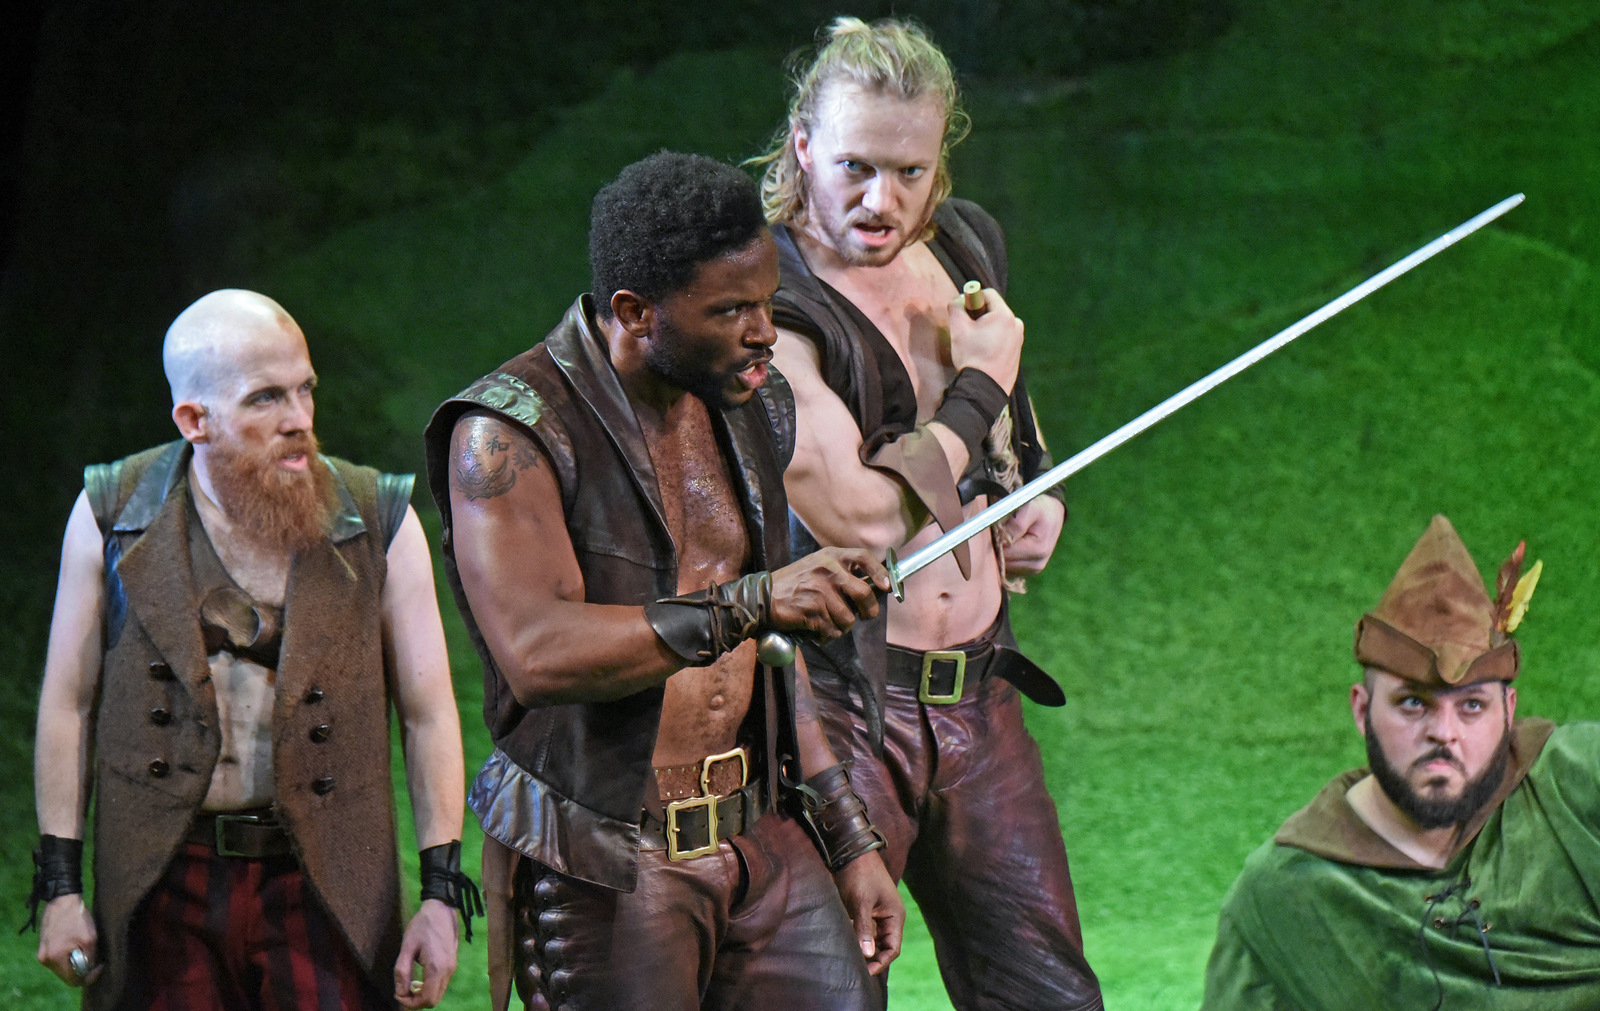 Vesturport and The Wallis’ The Heart of Robin Hood. Pictured (l-r): Jeremy Crawford, Luke Forbes, Sam Meader, and Daniel Franzese. Photo credit: Kevin Parry for The Wallis.